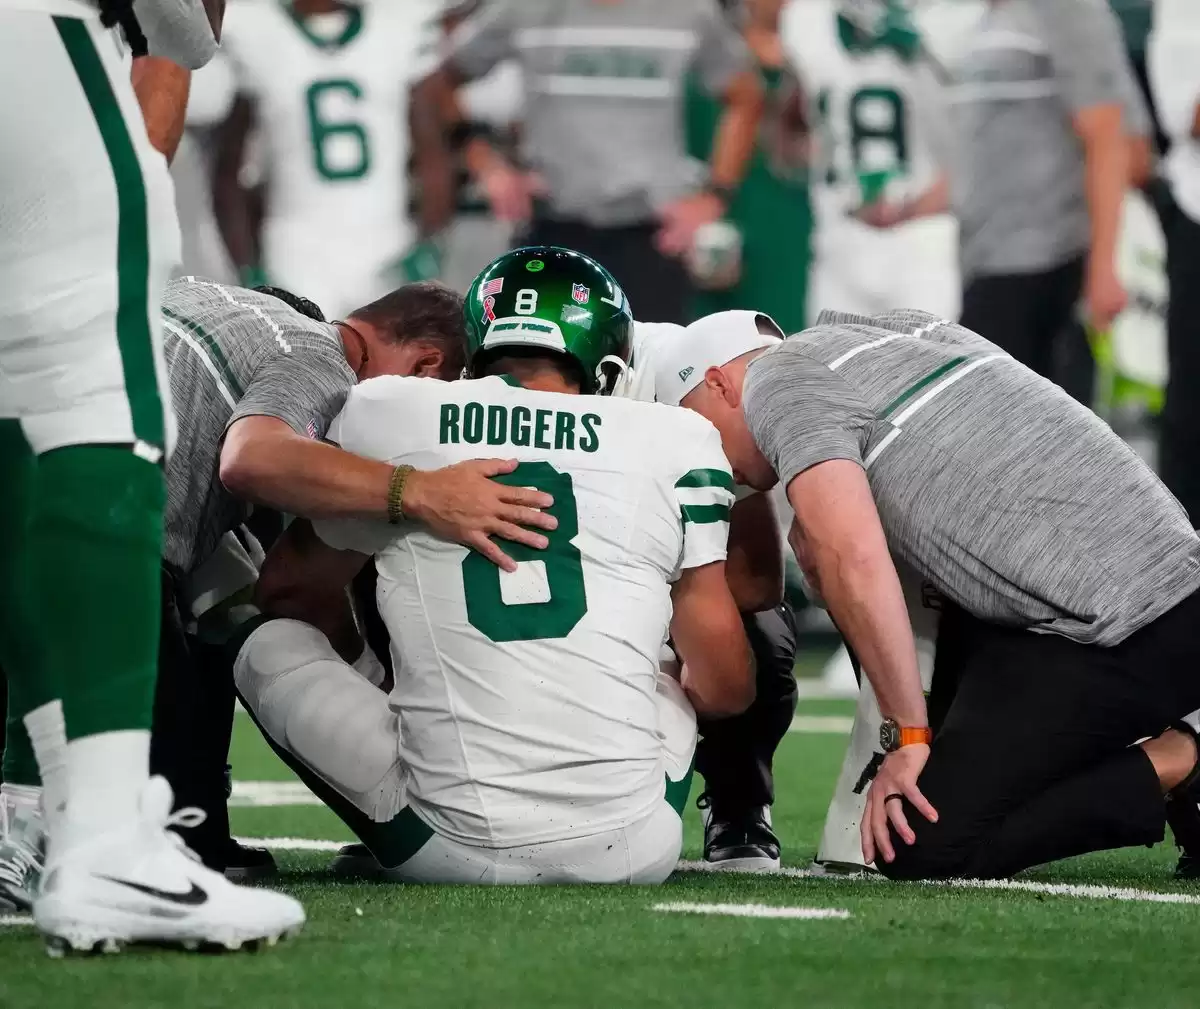 Jets Quarterback Aaron Rodgers Tears Left Achilles Tendon, Potentially Ruling Him Out for the Season